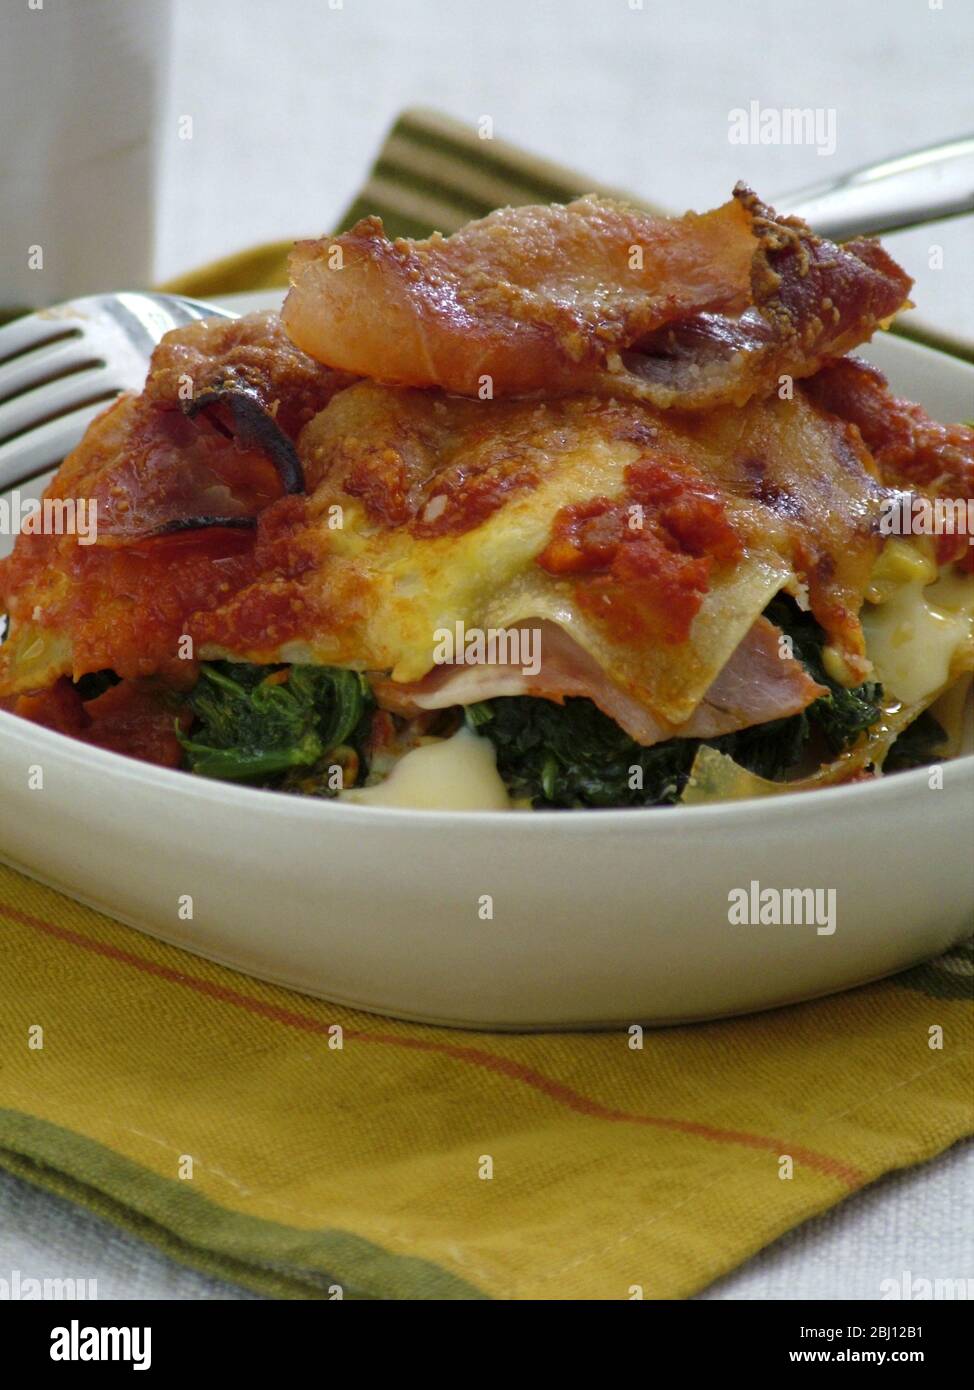 Portion of lasagne with parma ham, spinach and cheese - Stock Photo